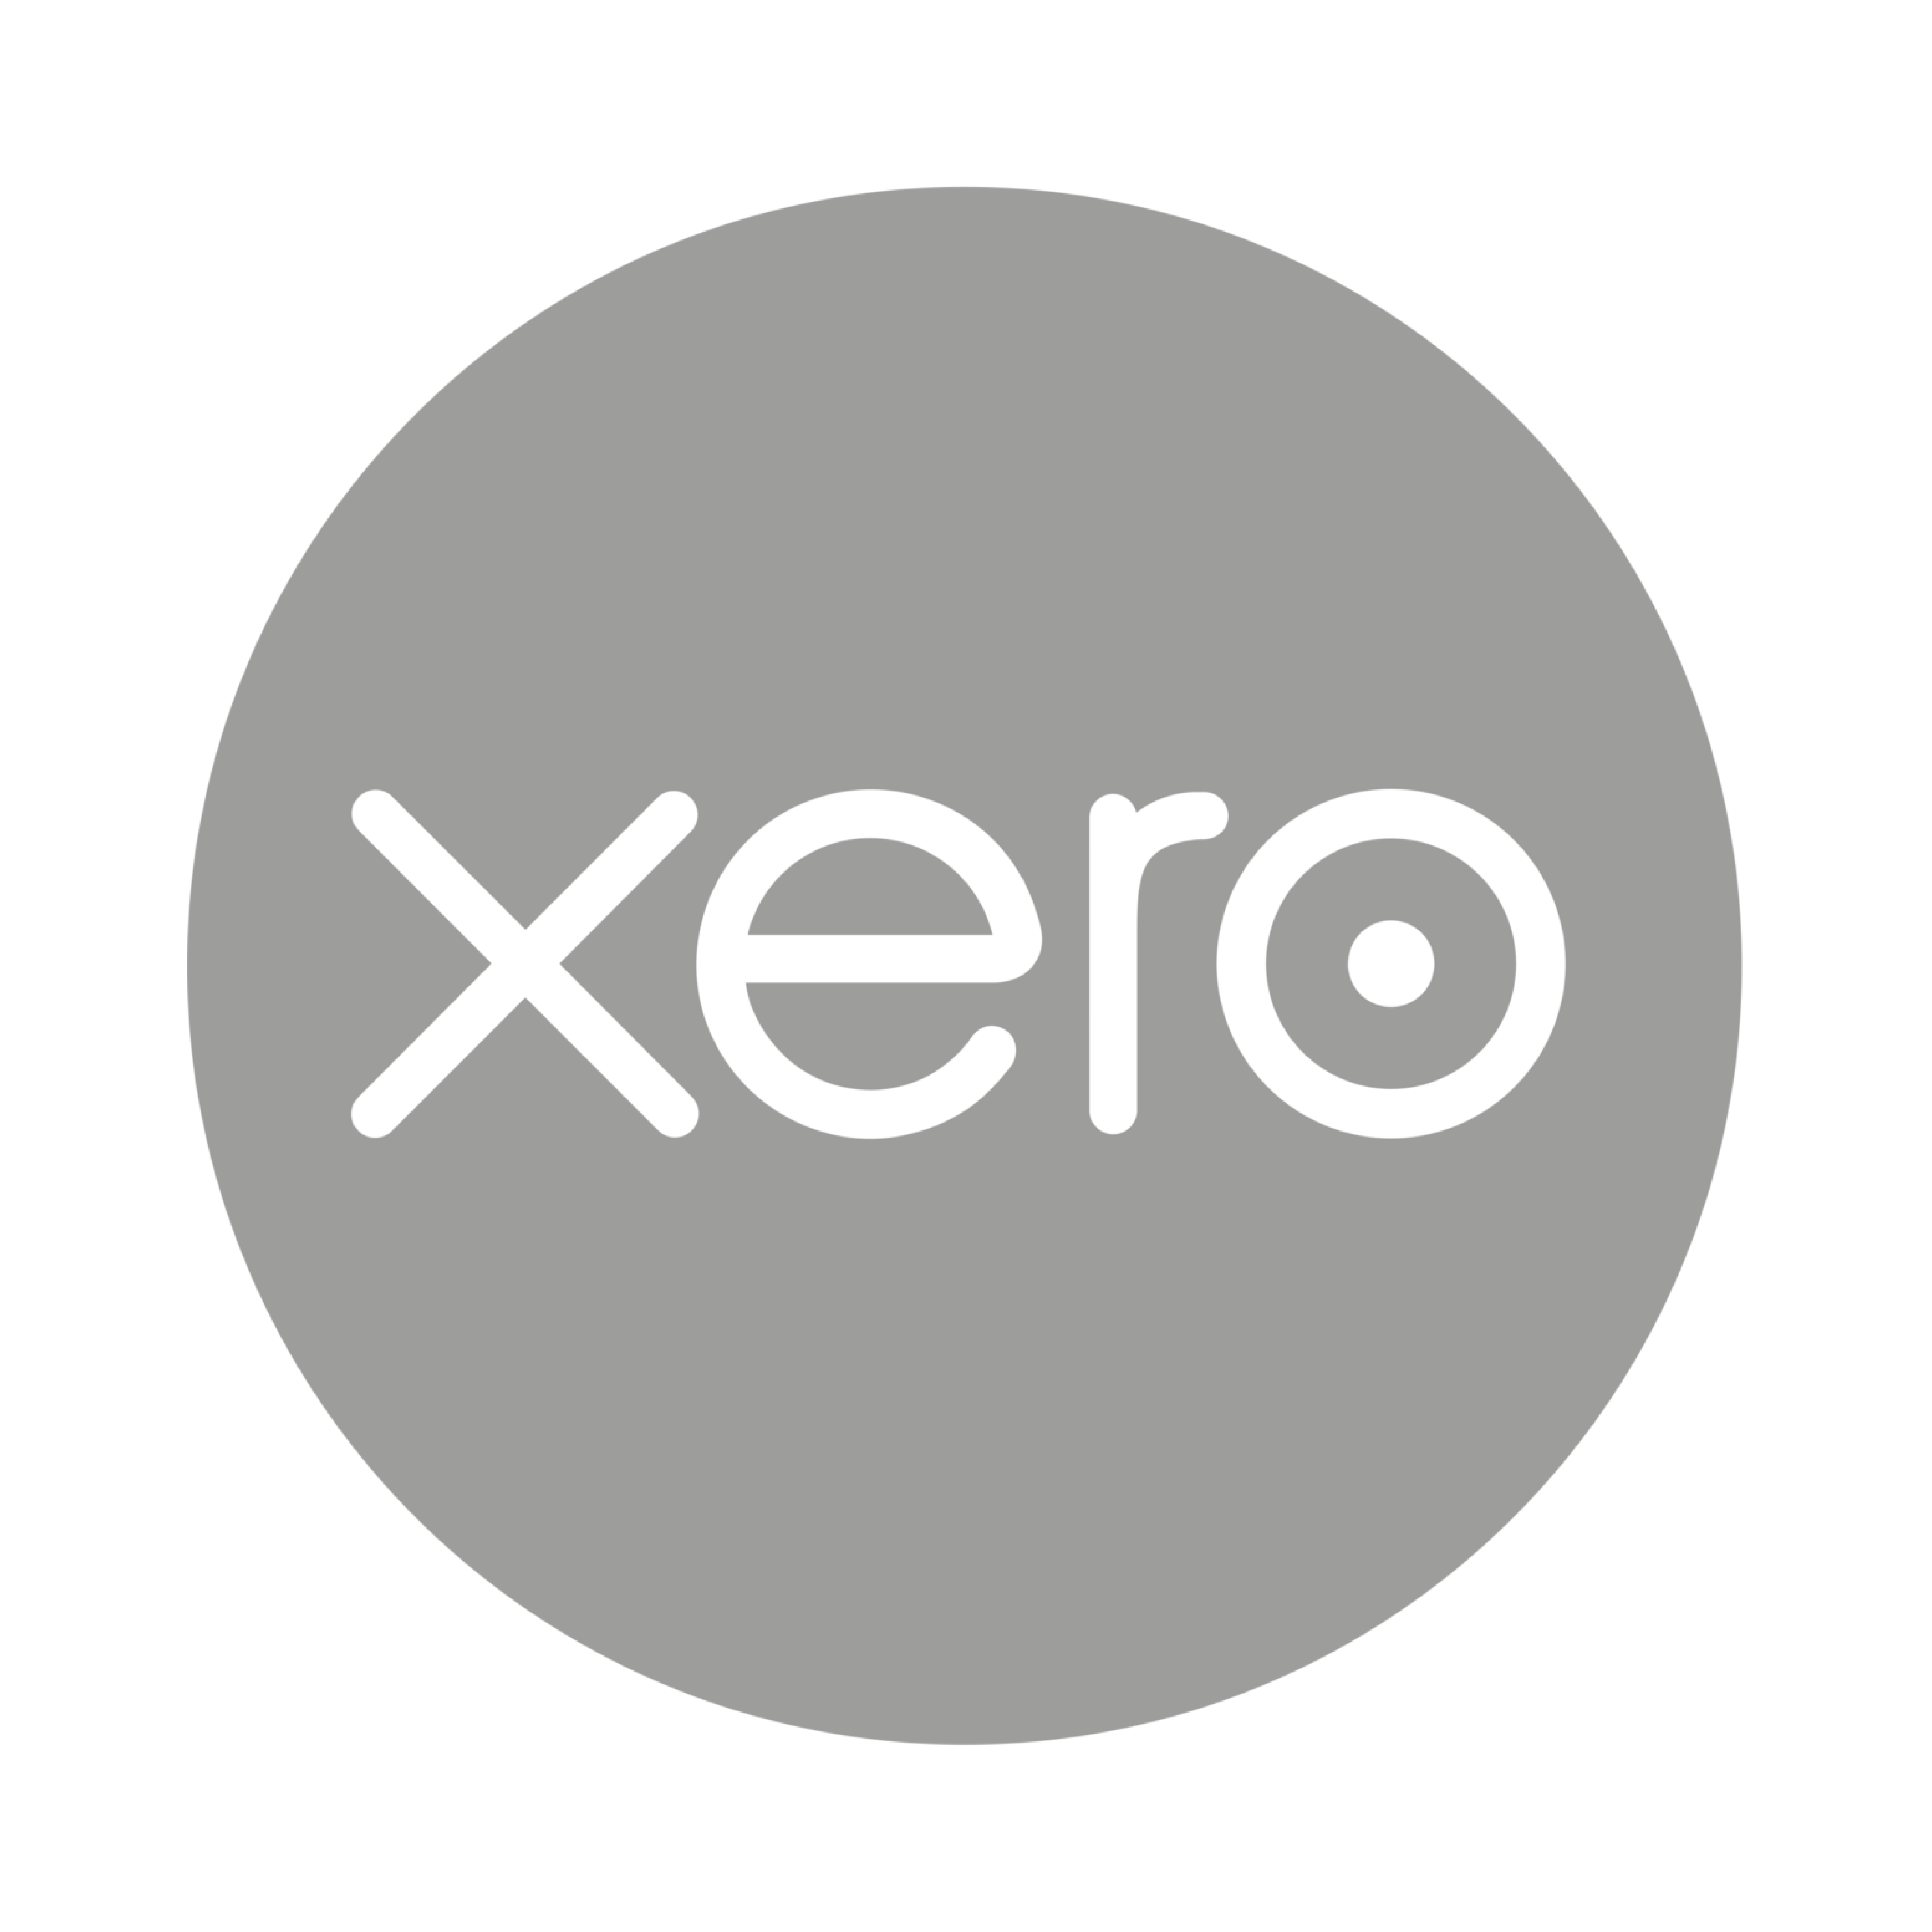 Introducing the Xero logo in a sophisticated shade of grey. This logo features the iconic Xero wordmark meticulously designed with clean lines and balanced proportions. The grey color palette lends a timeless and refined touch, exuding a sense of professionalism and reliability. With its sleek and understated aesthetic, the grey Xero logo embodies the brand's commitment to simplicity, efficiency, and innovation in the realm of cloud-based accounting solutions. Prepare to experience the seamless integration and cutting-edge features offered by Xero, as represented by this elegant and timeless grey logo.